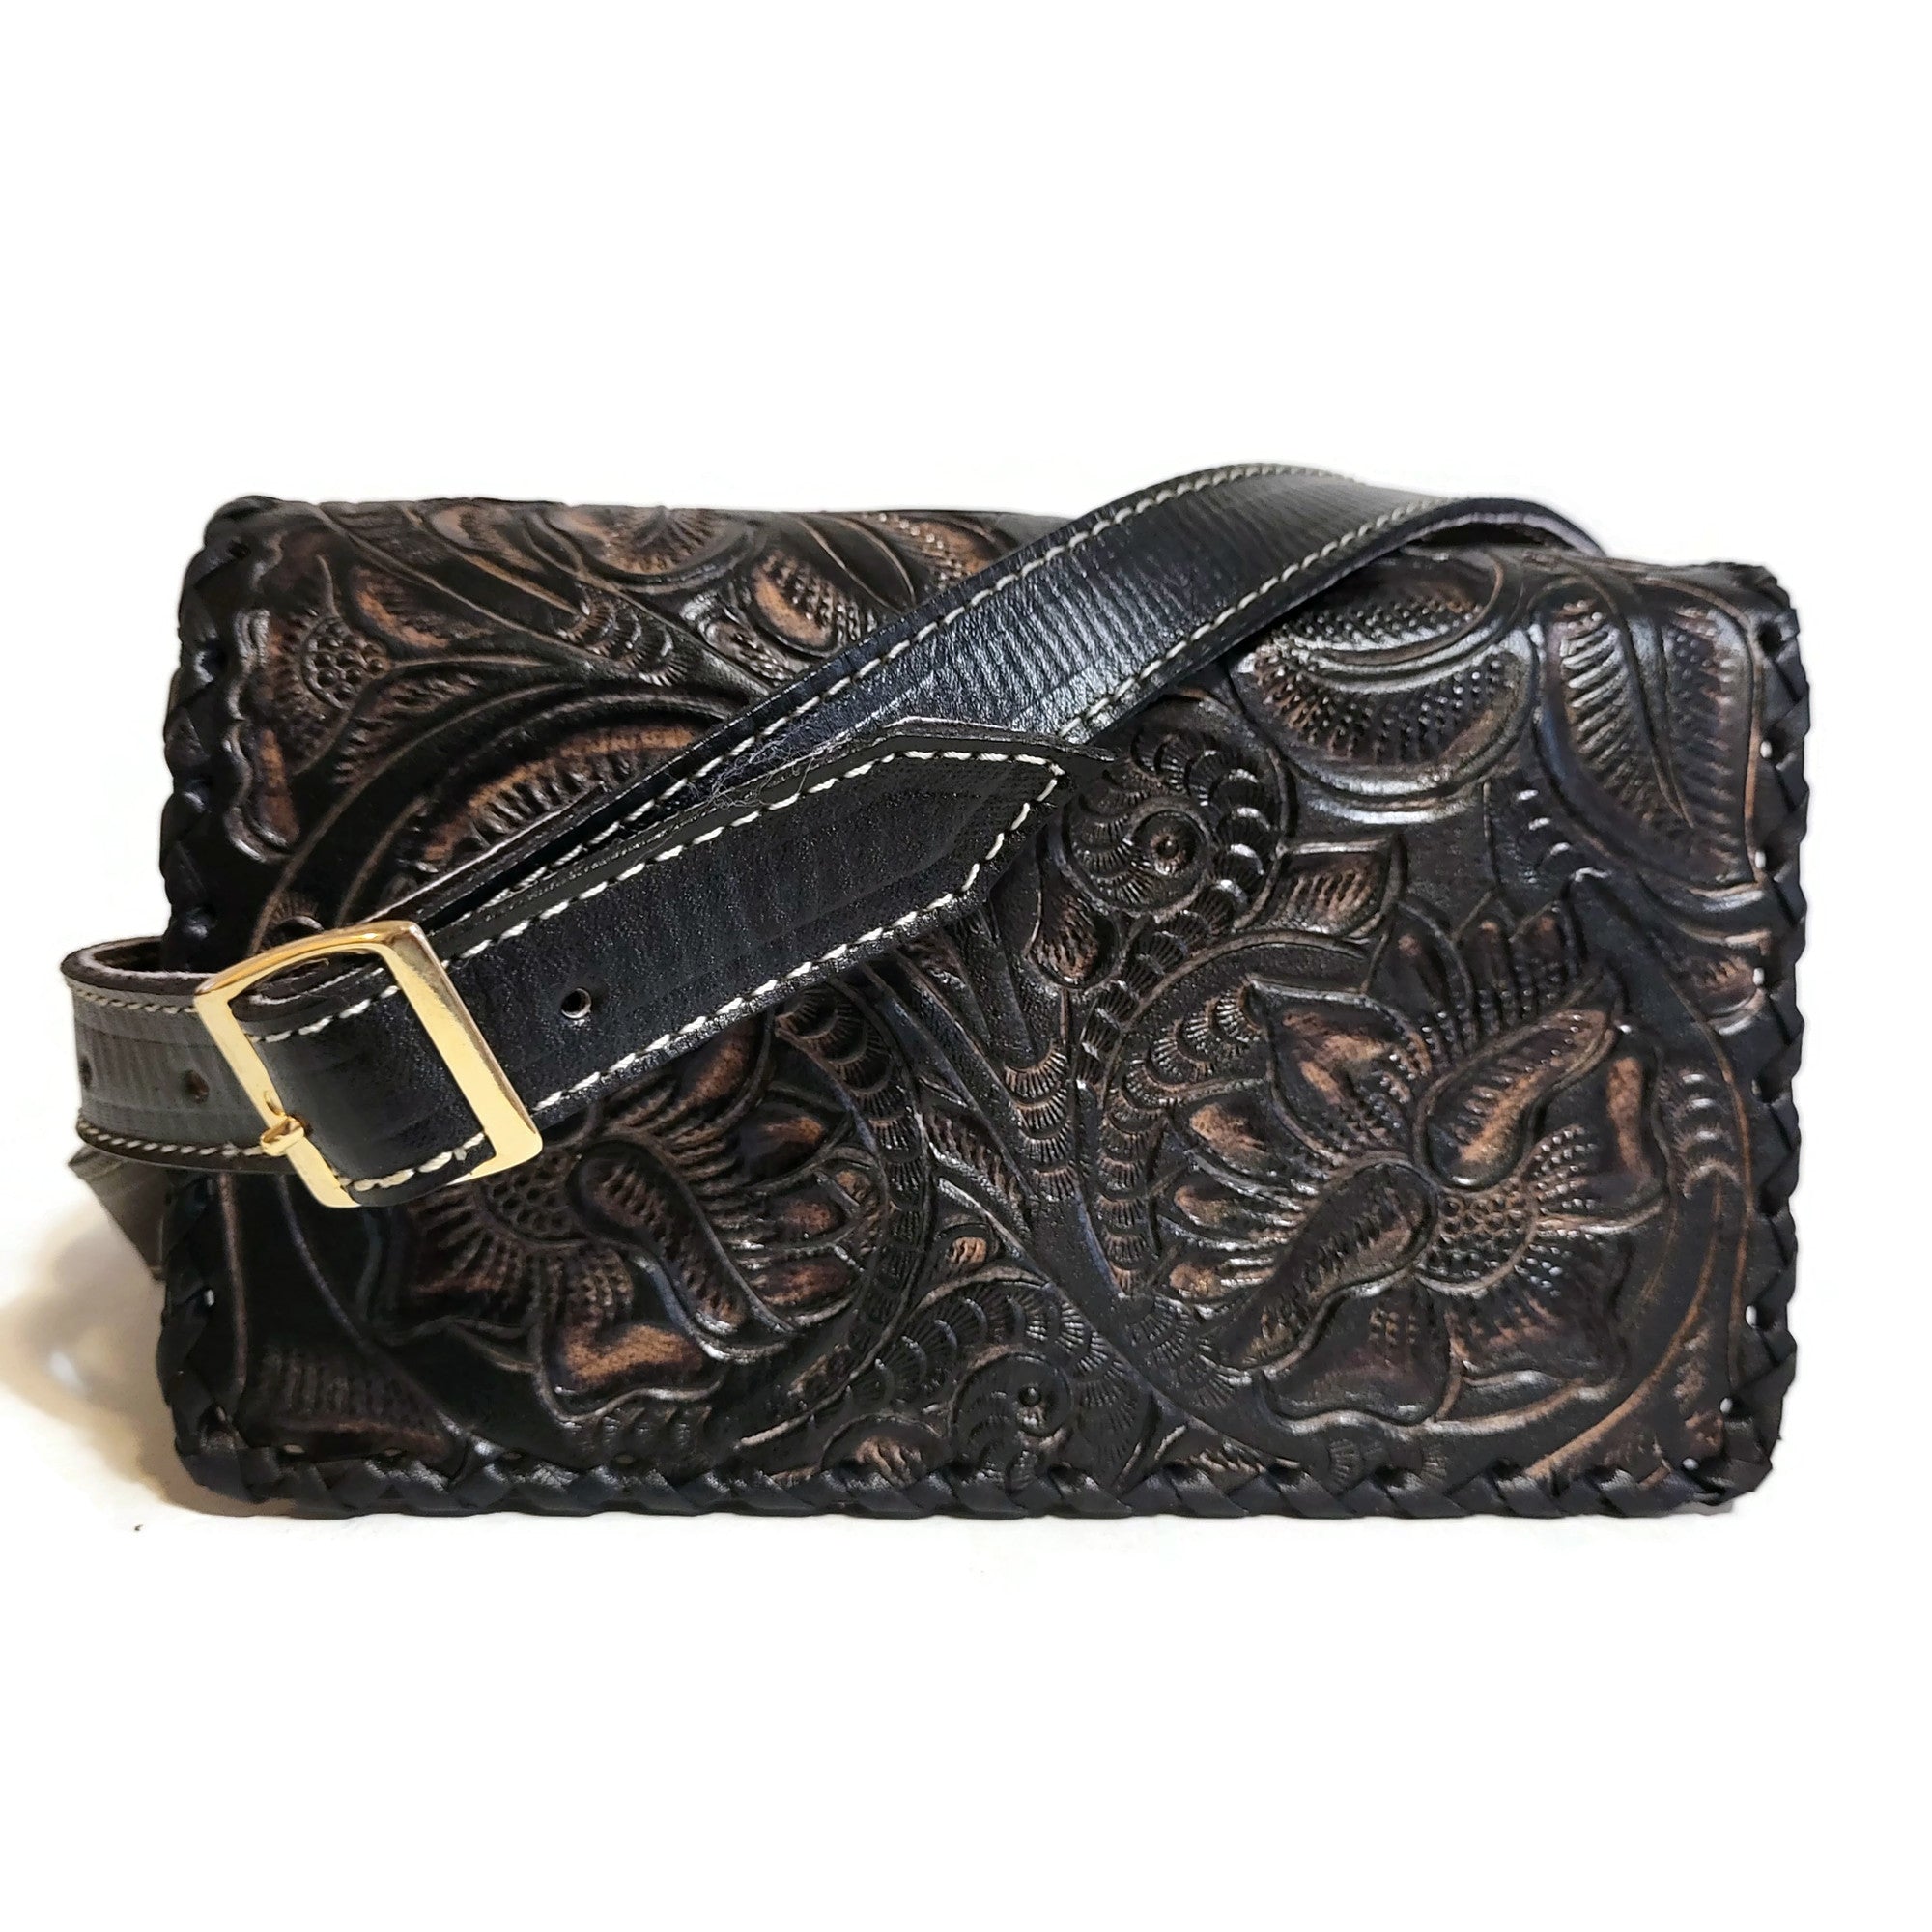 Hand tooled leather bag for women, small bag